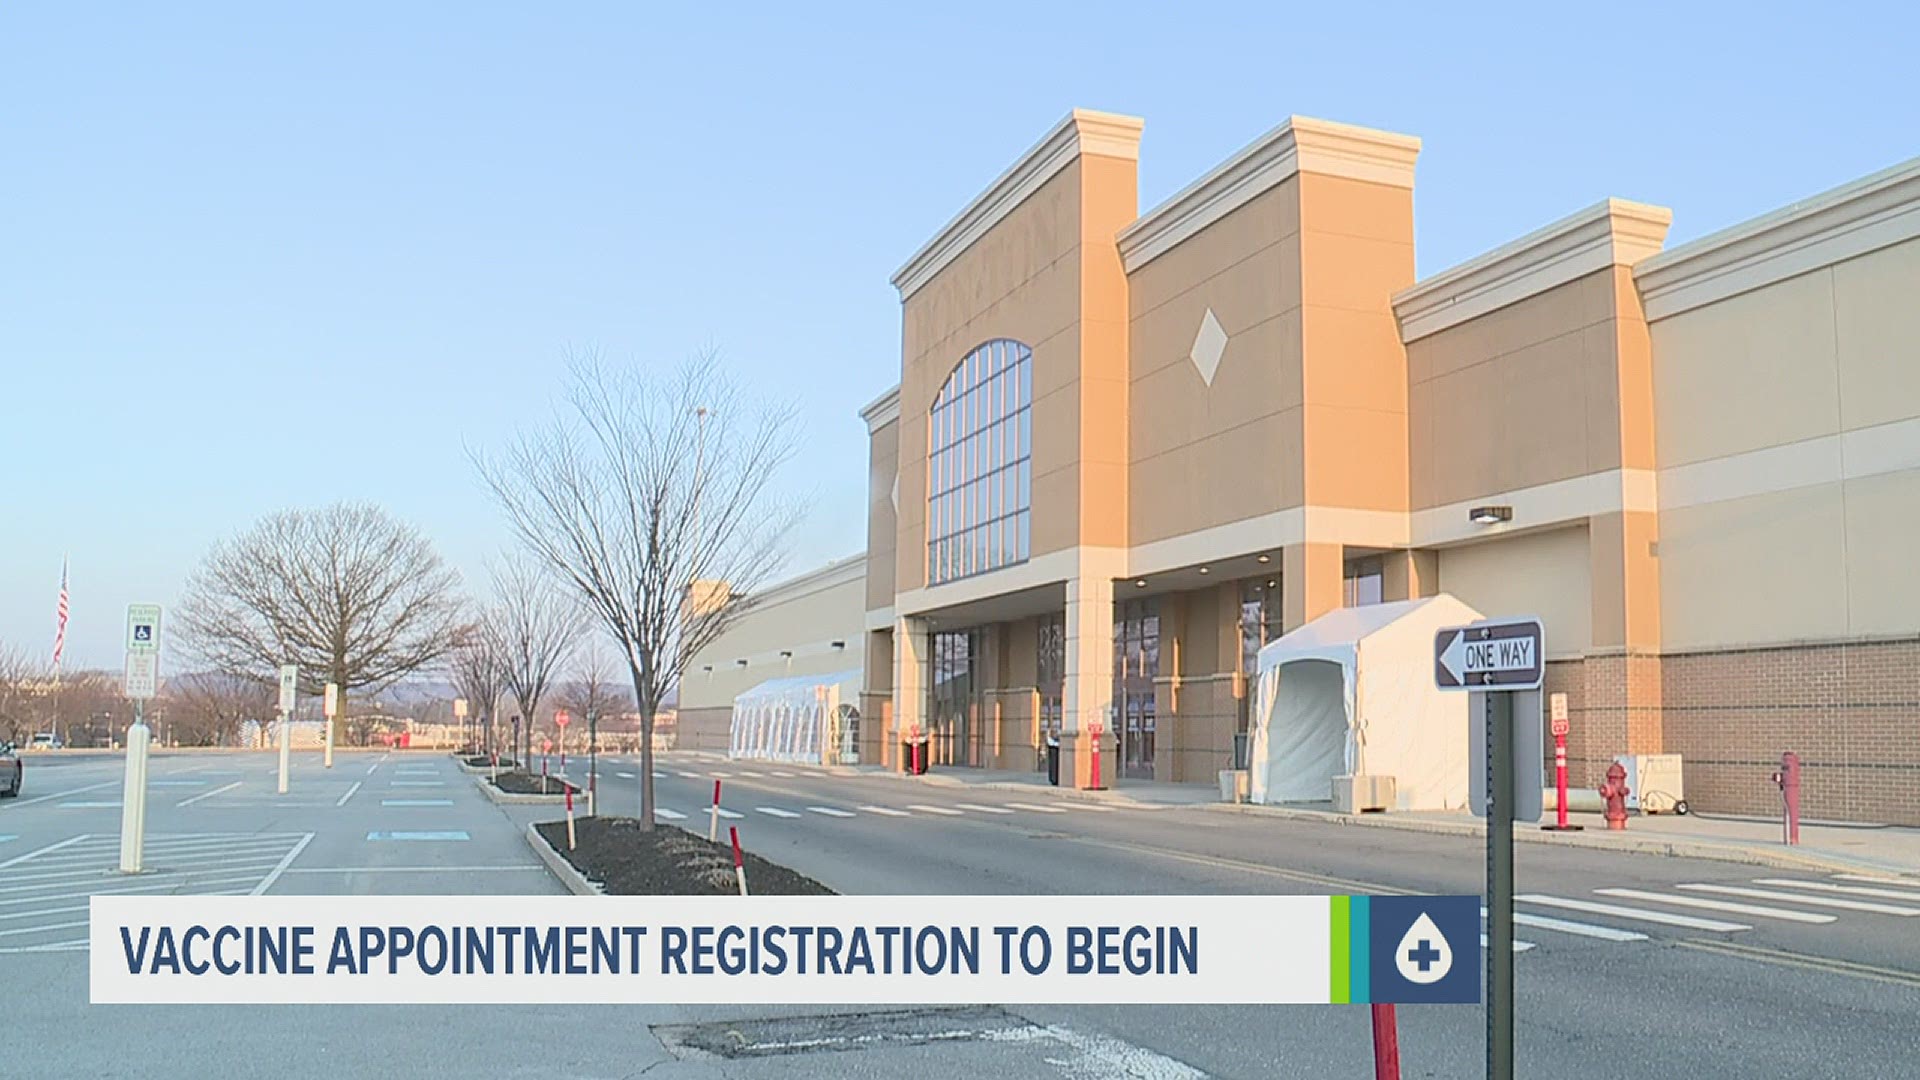 After weeks of planning, the mass vaccination site in Lancaster County is set to open to the public on March 10.